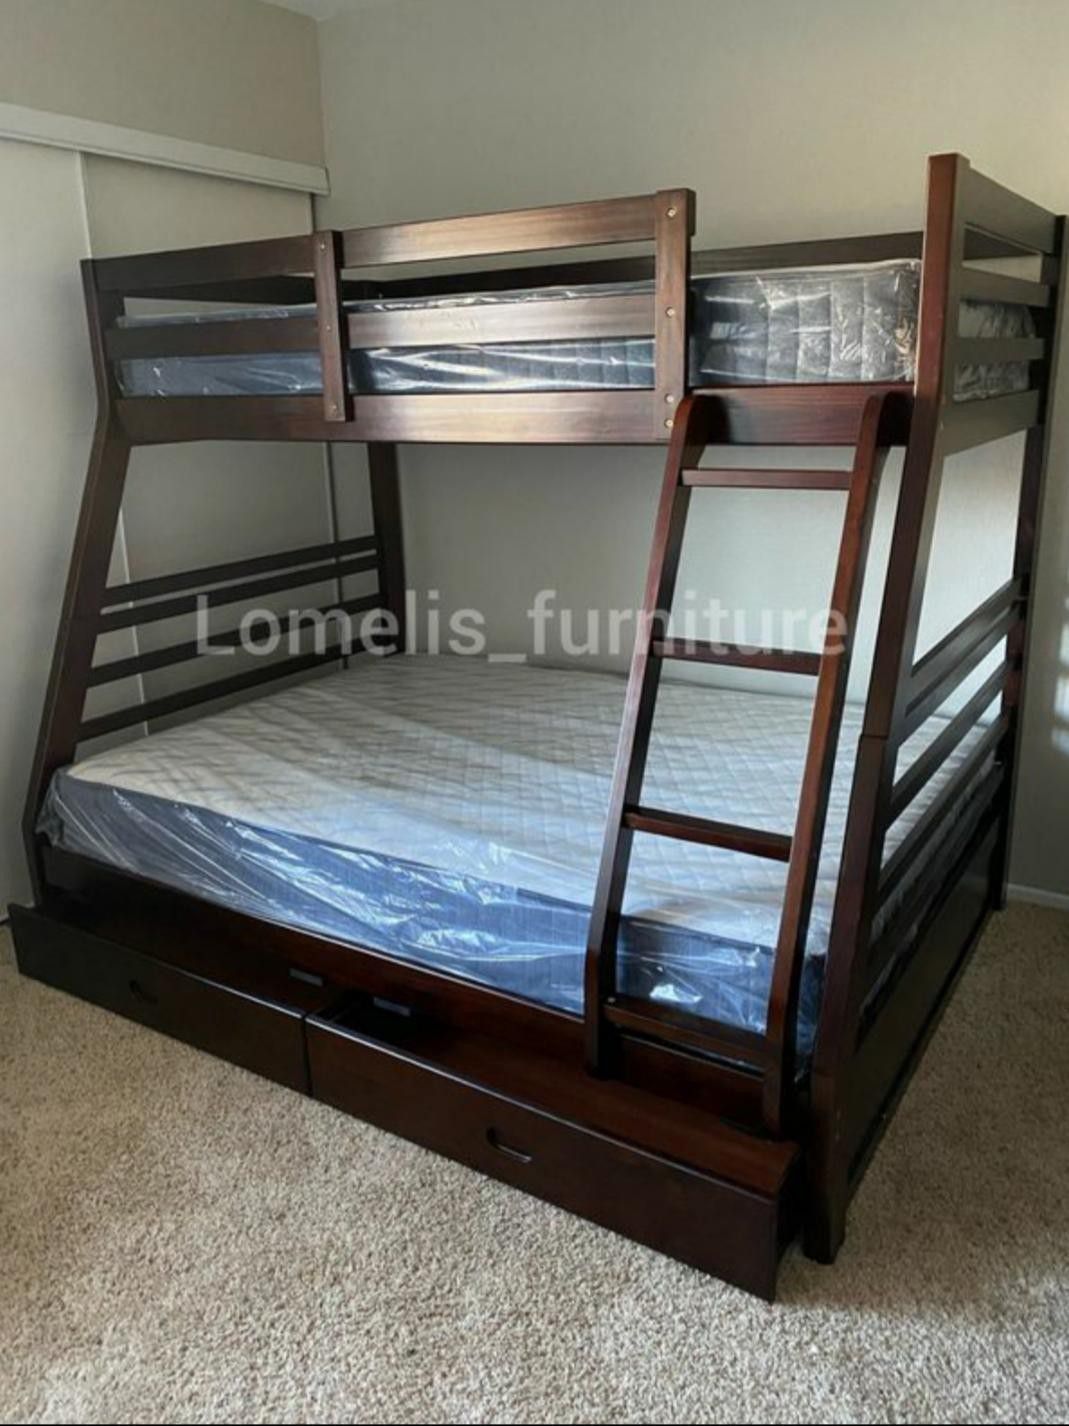 TWIN/FULL BUNK BEDS W MATTRESSES INCLUDED.